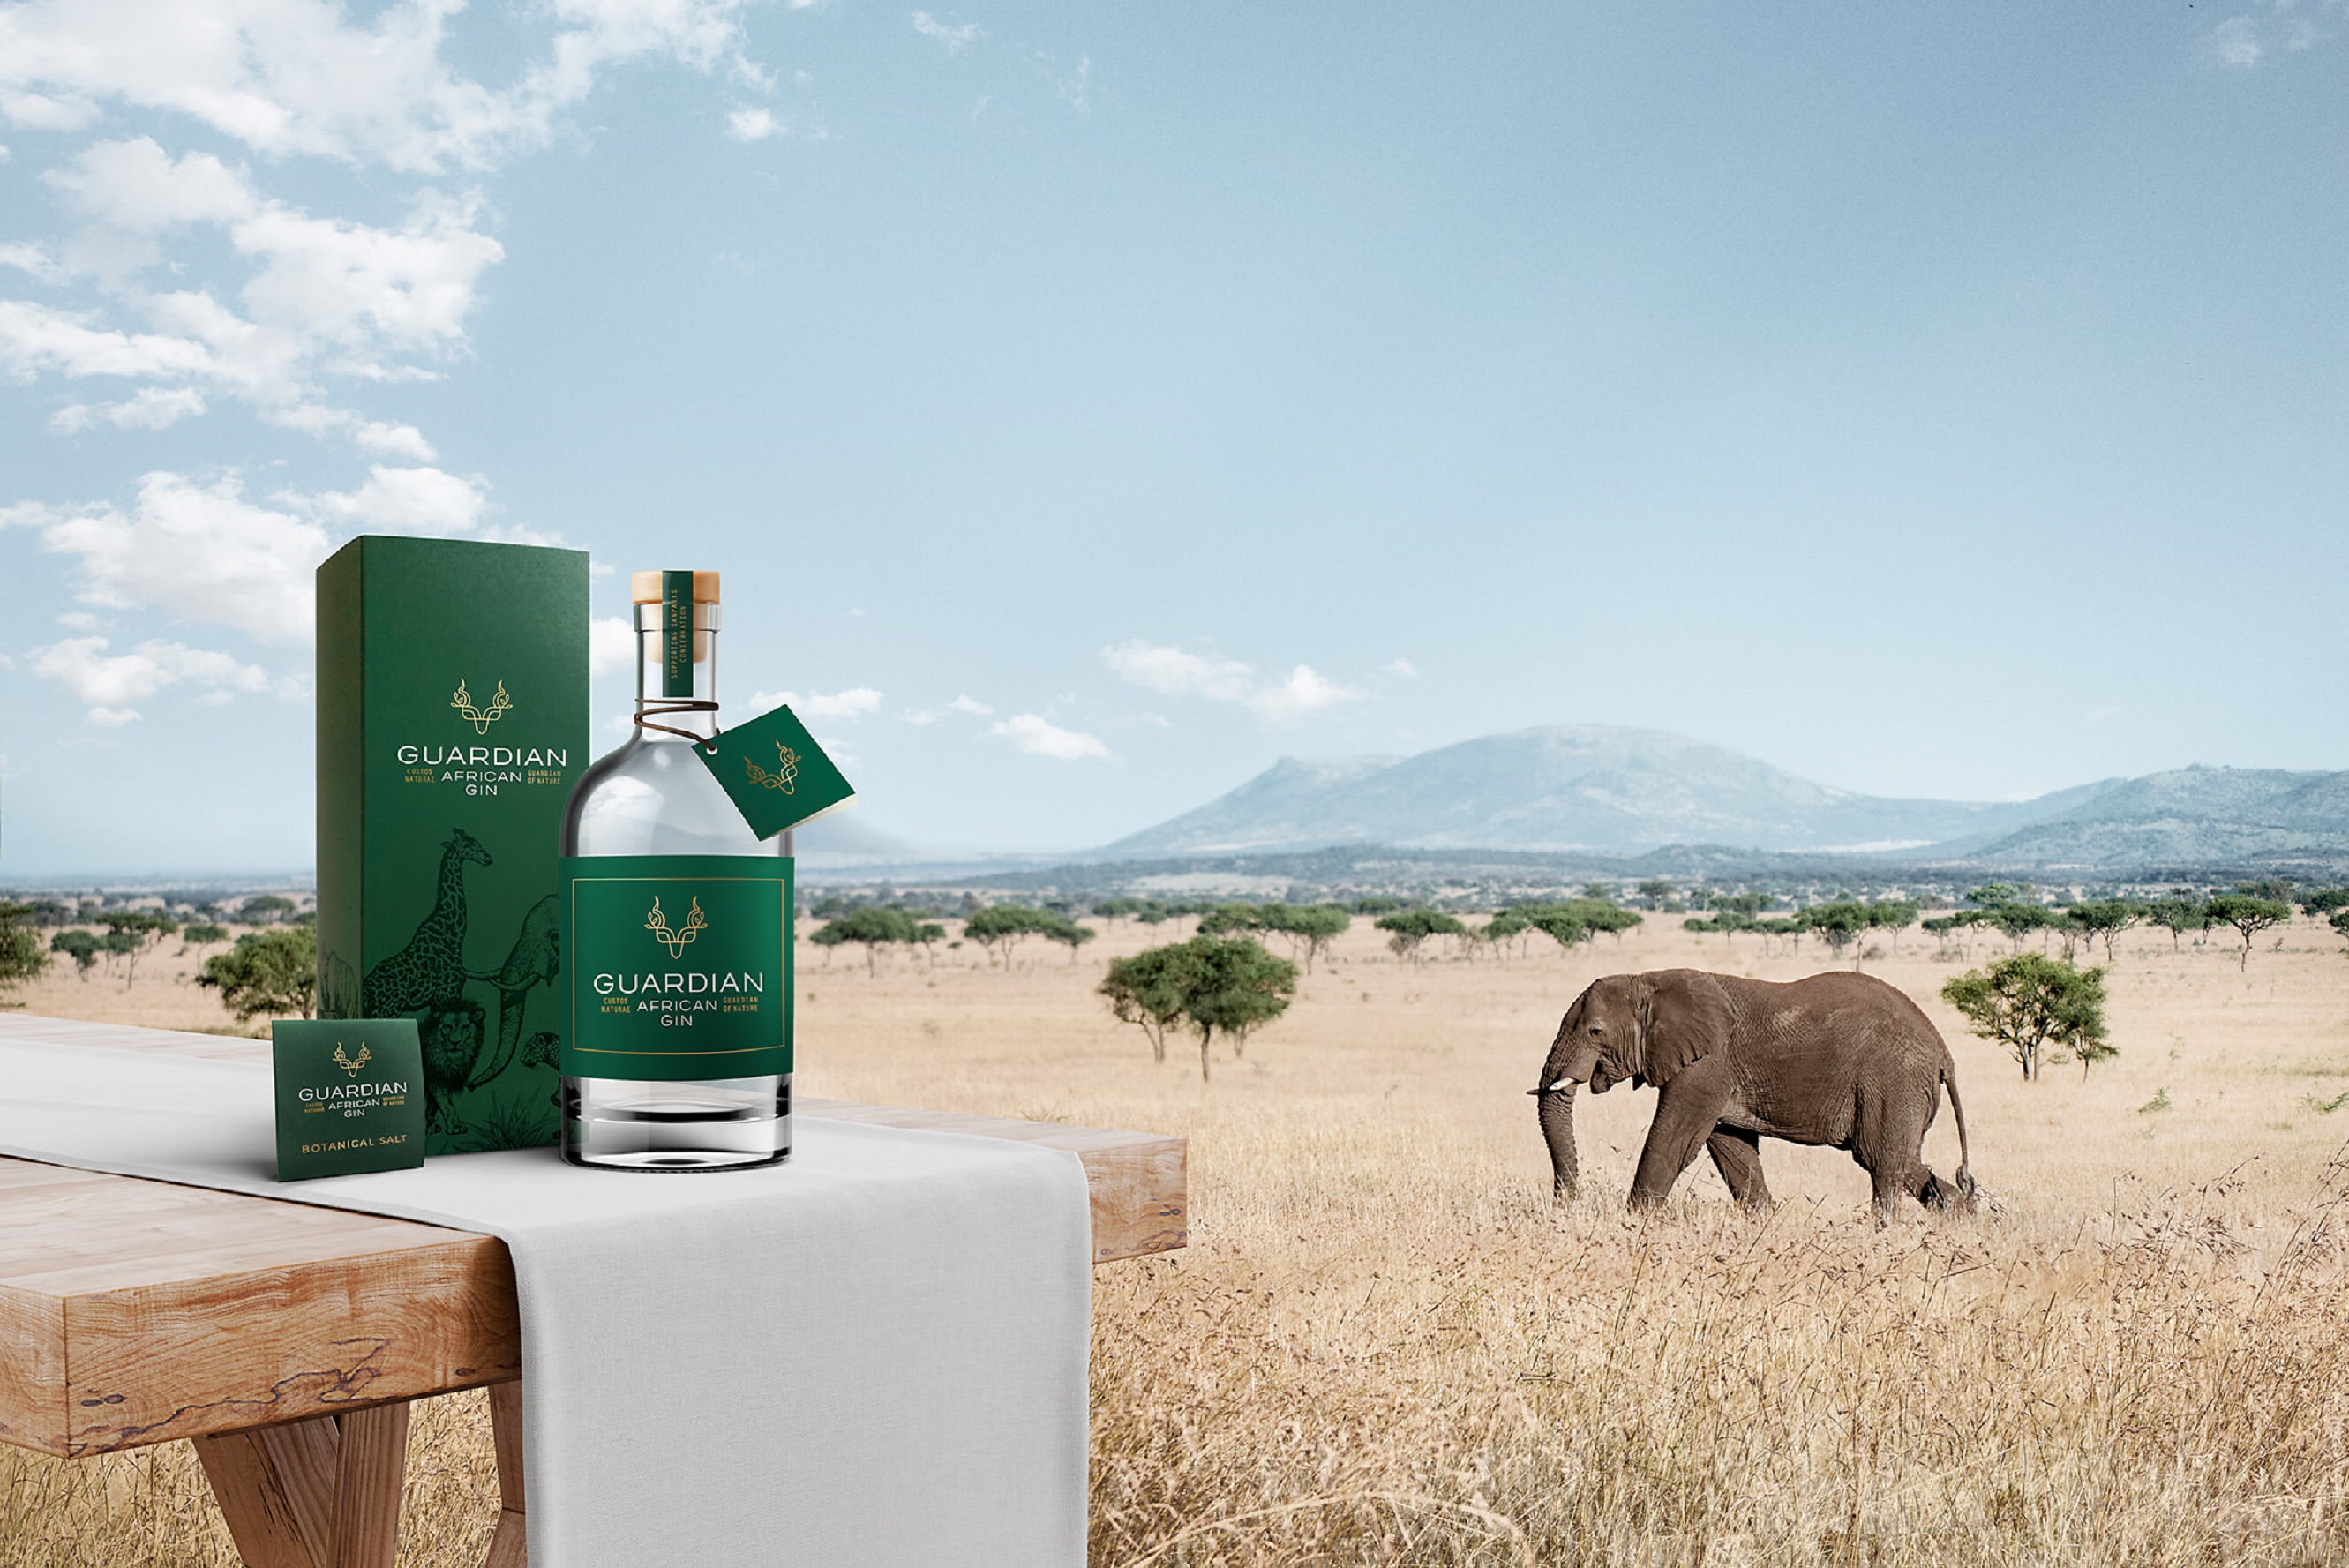 Guardian Gin - Guardian African Gin wins DOUBLE GOLD at the SA